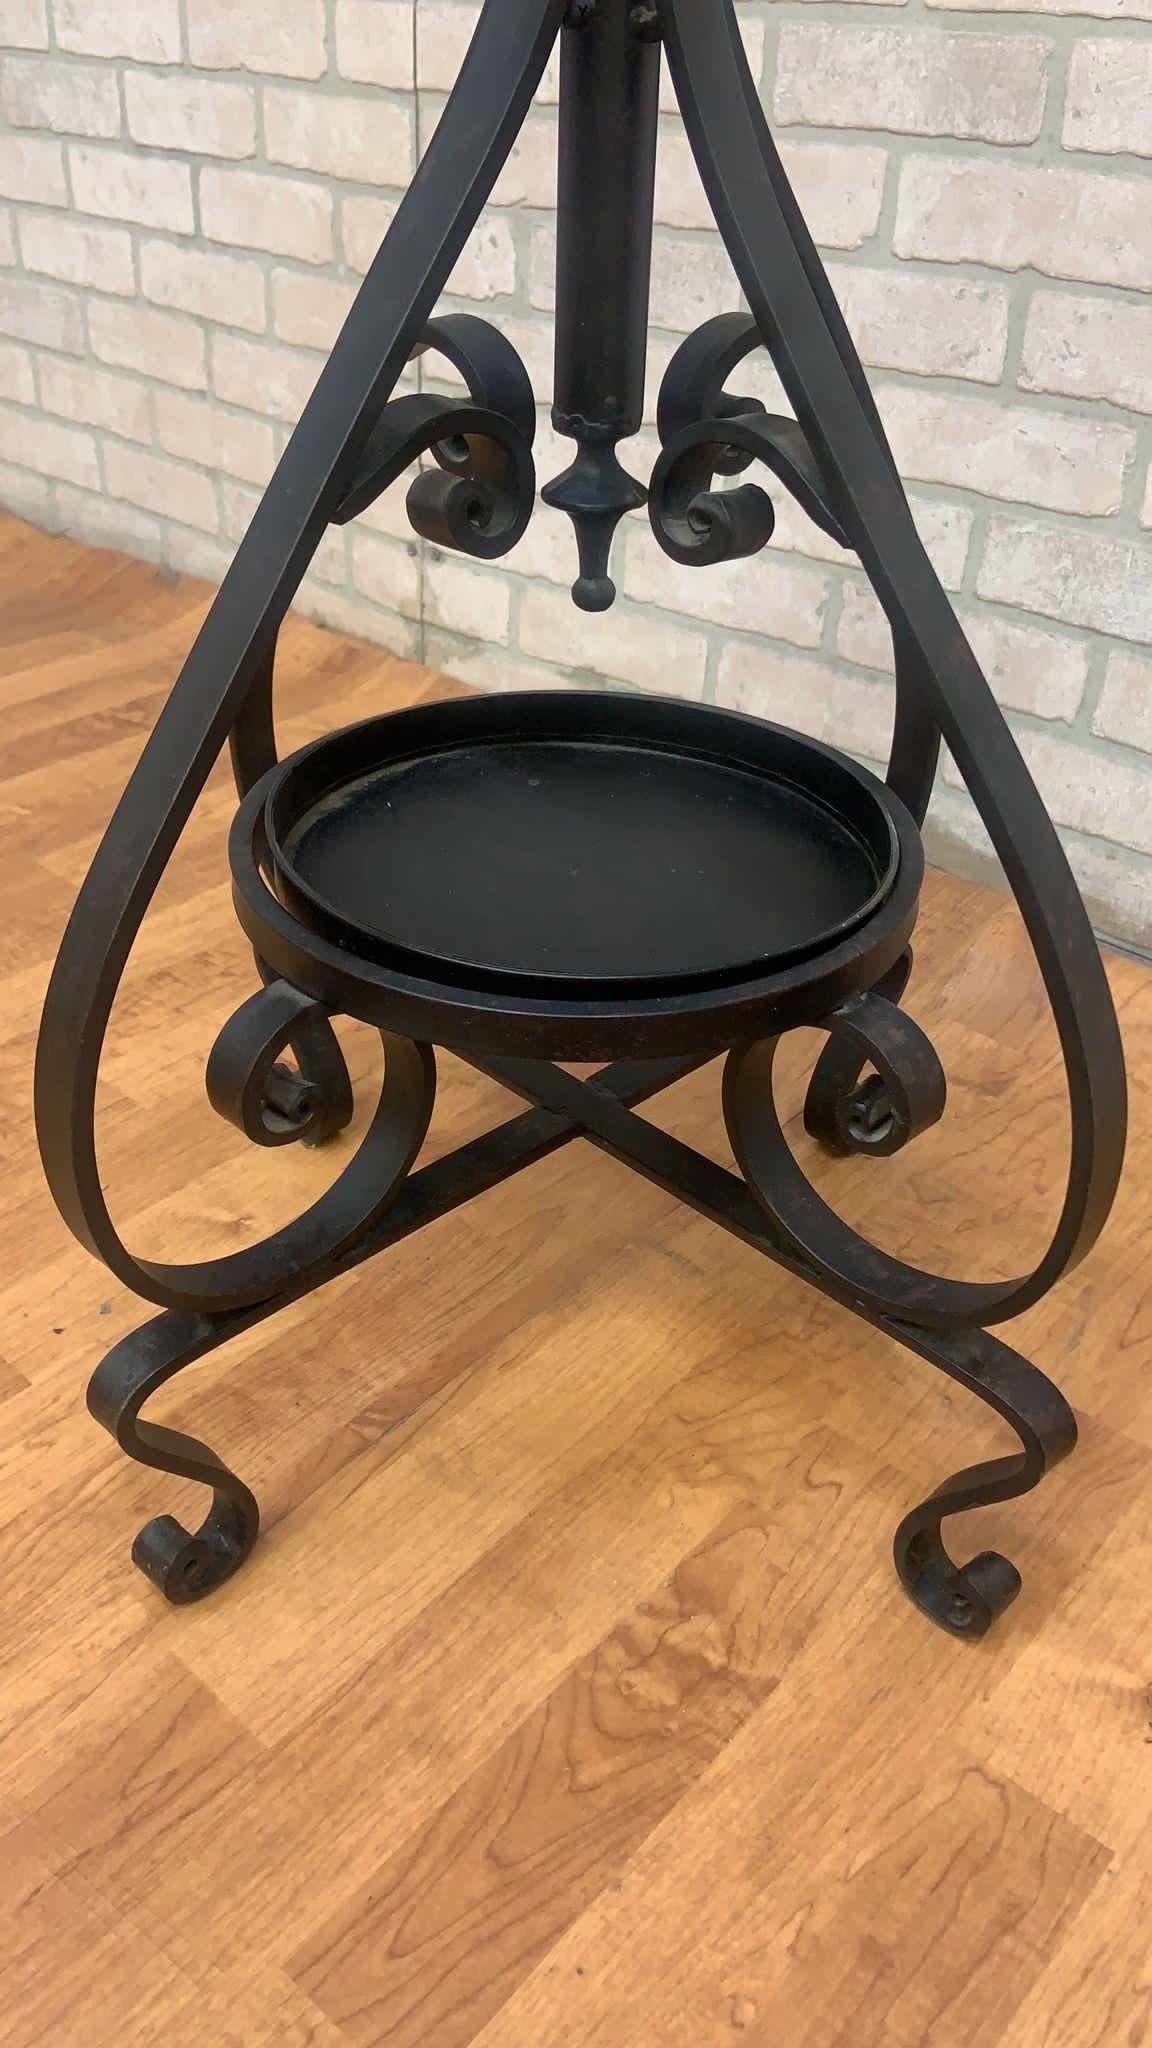 Modern Vintage Cast Iron Coat Rack With Umbrella Stand For Sale